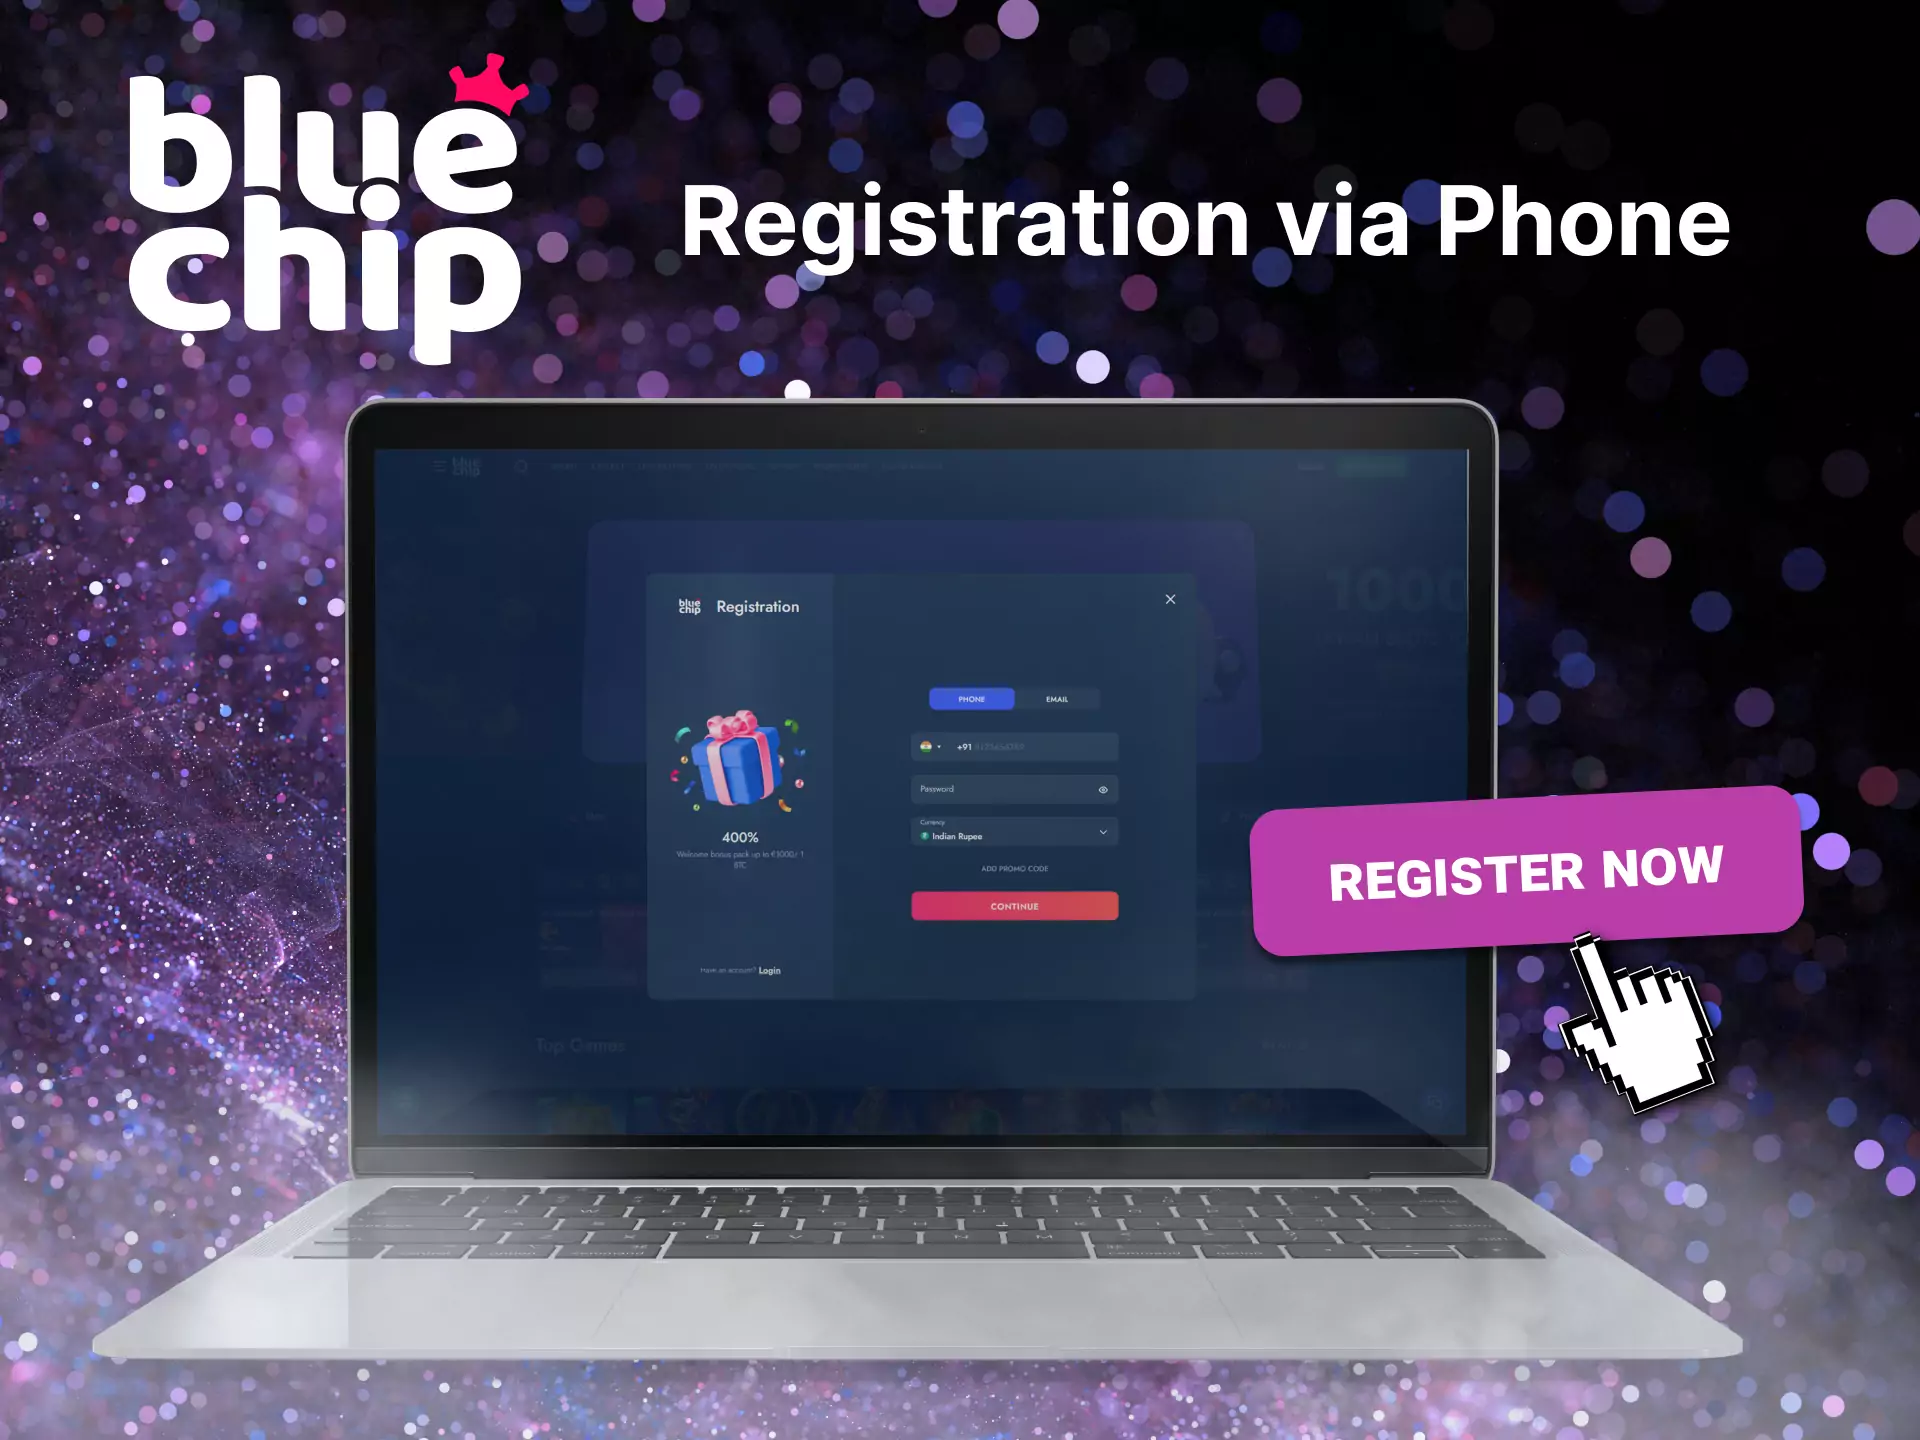 Sign up for Bluechip using your phone number.